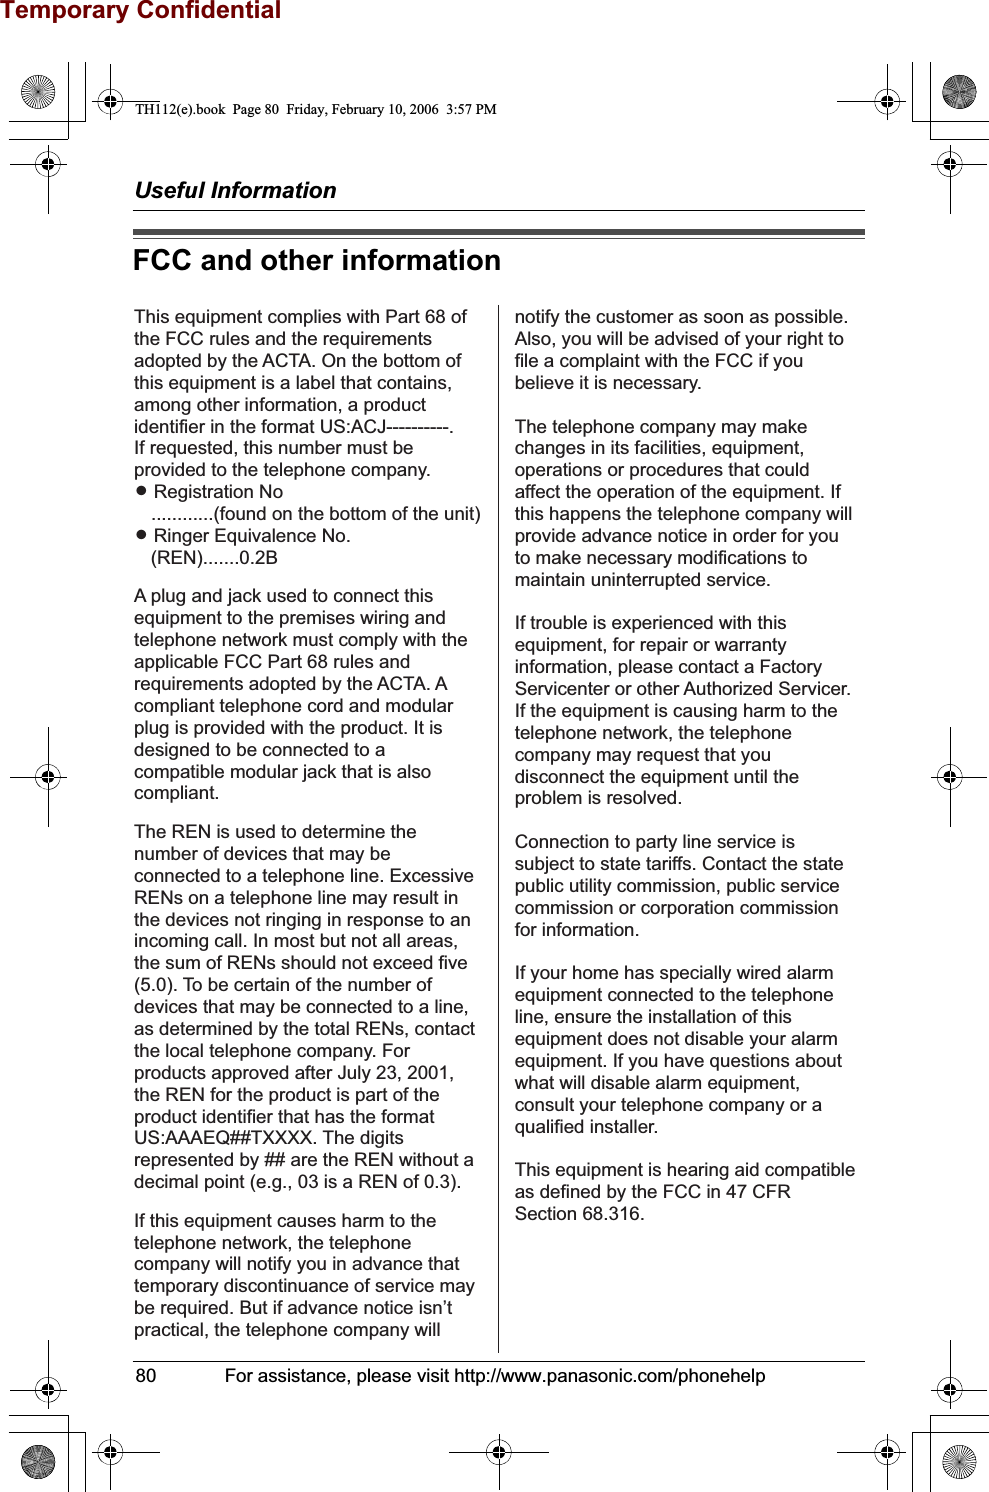 Temporary ConfidentialUseful Information80              For assistance, please visit http://www.panasonic.com/phonehelpFCC and other informationThis equipment complies with Part 68 of the FCC rules and the requirements adopted by the ACTA. On the bottom of this equipment is a label that contains, among other information, a product identifier in the format US:ACJ----------.If requested, this number must be provided to the telephone company.L Registration No   ............(found on the bottom of the unit)L Ringer Equivalence No.   (REN).......0.2BA plug and jack used to connect this equipment to the premises wiring and telephone network must comply with the applicable FCC Part 68 rules and requirements adopted by the ACTA. A compliant telephone cord and modular plug is provided with the product. It is designed to be connected to a compatible modular jack that is also compliant.The REN is used to determine the number of devices that may be connected to a telephone line. Excessive RENs on a telephone line may result in the devices not ringing in response to an incoming call. In most but not all areas, the sum of RENs should not exceed five (5.0). To be certain of the number of devices that may be connected to a line, as determined by the total RENs, contact the local telephone company. For products approved after July 23, 2001, the REN for the product is part of the product identifier that has the format US:AAAEQ##TXXXX. The digits represented by ## are the REN without a decimal point (e.g., 03 is a REN of 0.3).If this equipment causes harm to the telephone network, the telephone company will notify you in advance thattemporary discontinuance of service may be required. But if advance notice isn’t practical, the telephone company will notify the customer as soon as possible. Also, you will be advised of your right to file a complaint with the FCC if you believe it is necessary.The telephone company may make changes in its facilities, equipment, operations or procedures that could affect the operation of the equipment. If this happens the telephone company will provide advance notice in order for you to make necessary modifications to maintain uninterrupted service.If trouble is experienced with this equipment, for repair or warranty information, please contact a Factory Servicenter or other Authorized Servicer. If the equipment is causing harm to the telephone network, the telephone company may request that you disconnect the equipment until the problem is resolved.Connection to party line service is subject to state tariffs. Contact the state public utility commission, public service commission or corporation commission for information.If your home has specially wired alarm equipment connected to the telephone line, ensure the installation of this equipment does not disable your alarm equipment. If you have questions about what will disable alarm equipment, consult your telephone company or a qualified installer.This equipment is hearing aid compatible as defined by the FCC in 47 CFR Section 68.316.TH112(e).book  Page 80  Friday, February 10, 2006  3:57 PM